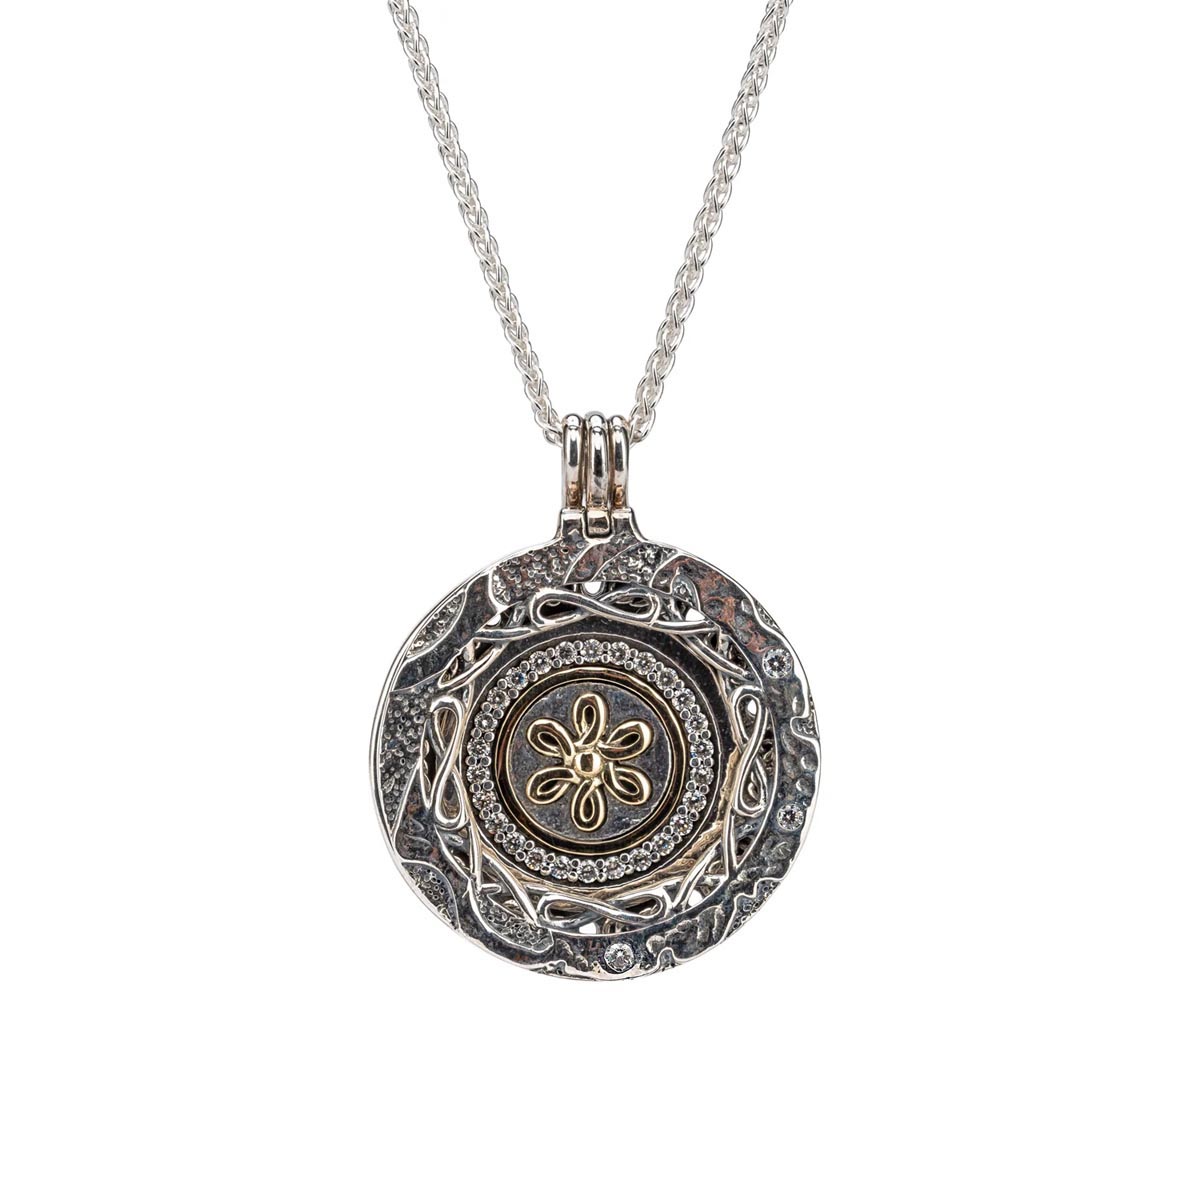 Keith Jack Eclipse 5 Way Necklace in Sterling Silver and 10kt Yellow Gold with Cubic Zirconia